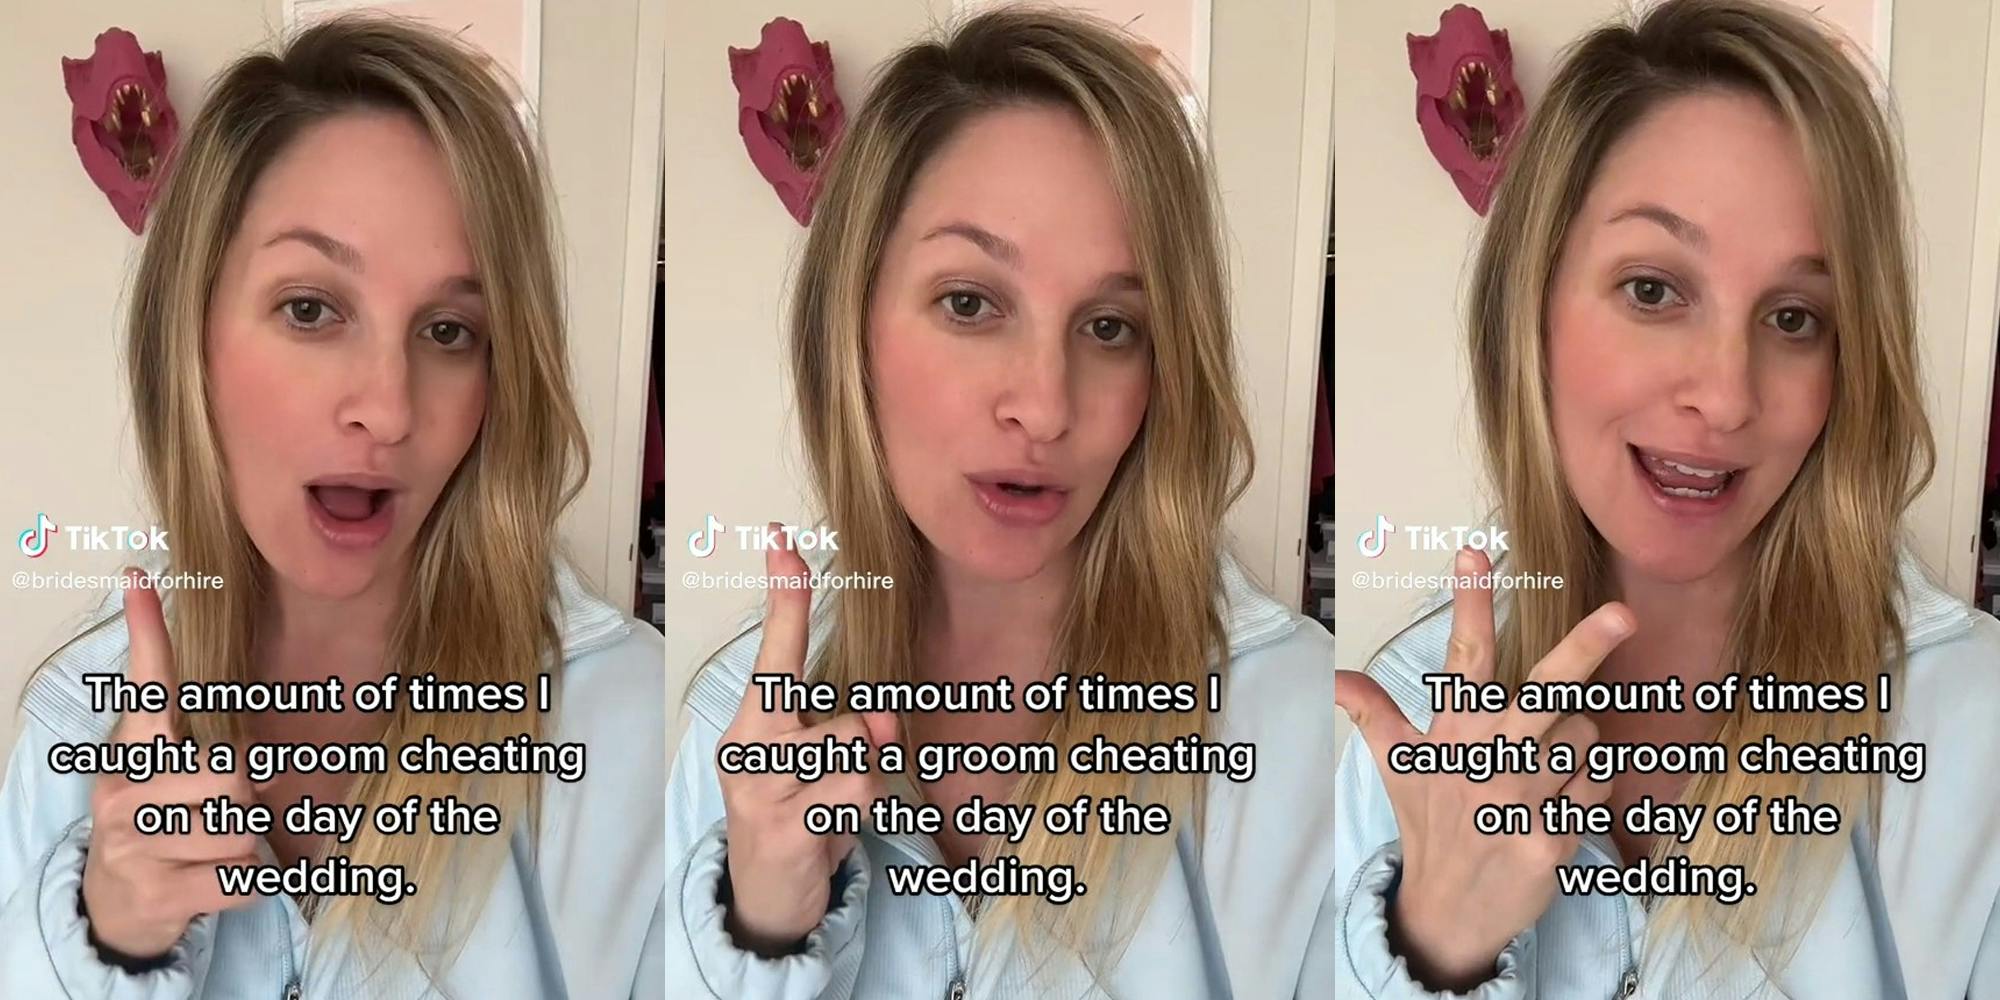 woman counting to three with caption "the amount of times i caught a groom cheating on the day of the wedding"